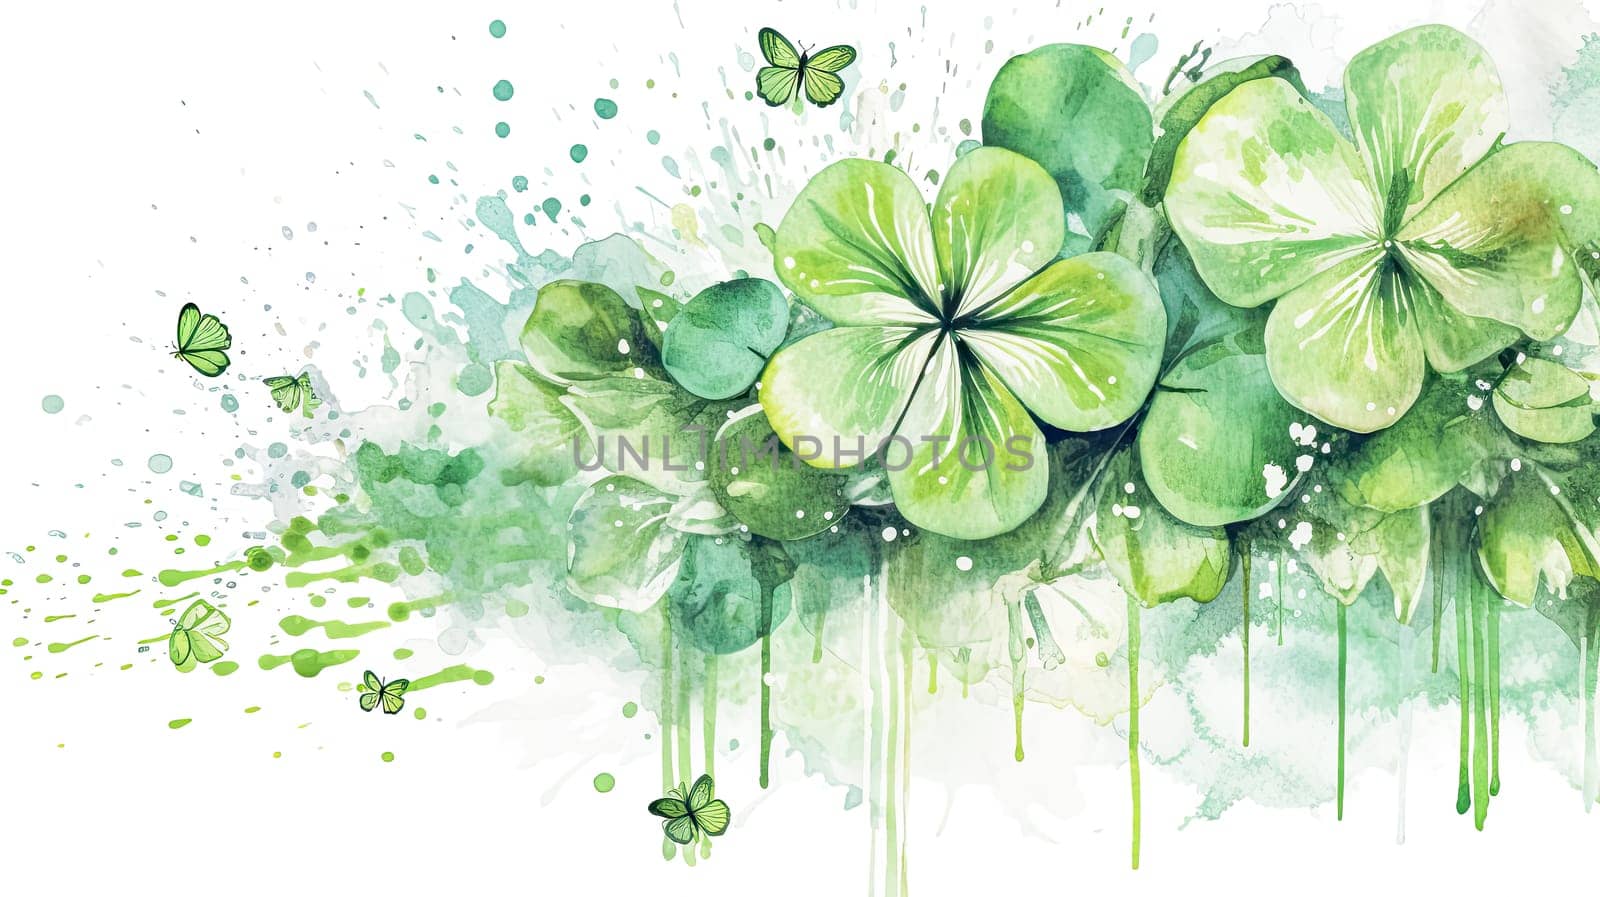 St. Patricks Day with a vivid depiction of the clover by Alla_Morozova93